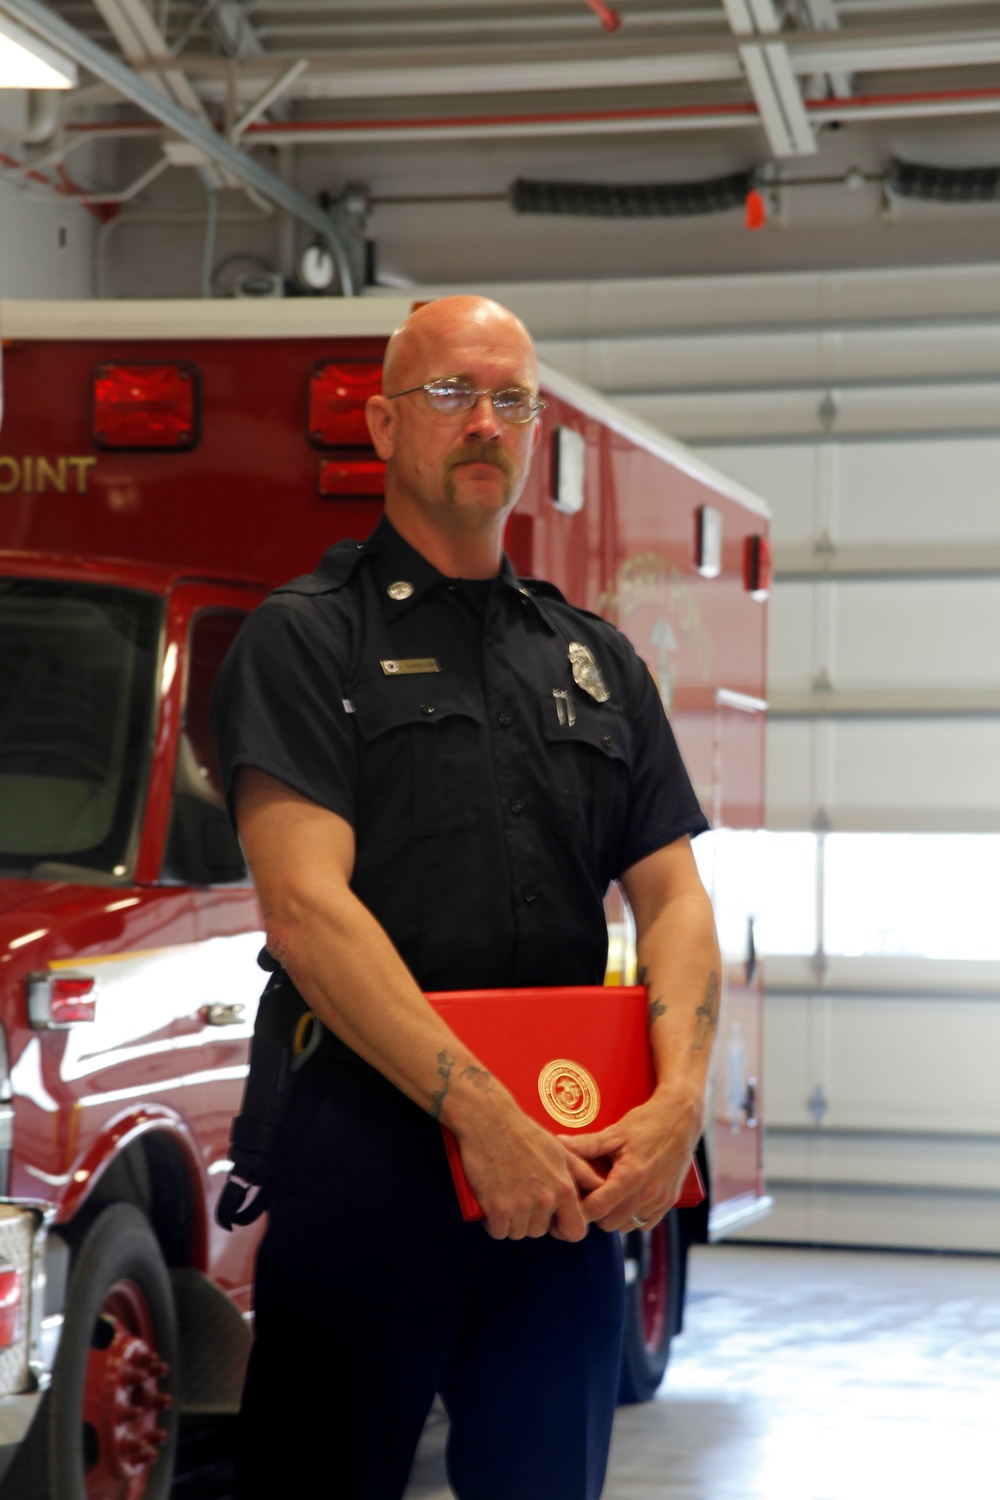 Barbour named Cherry Point Firefighter of the Year